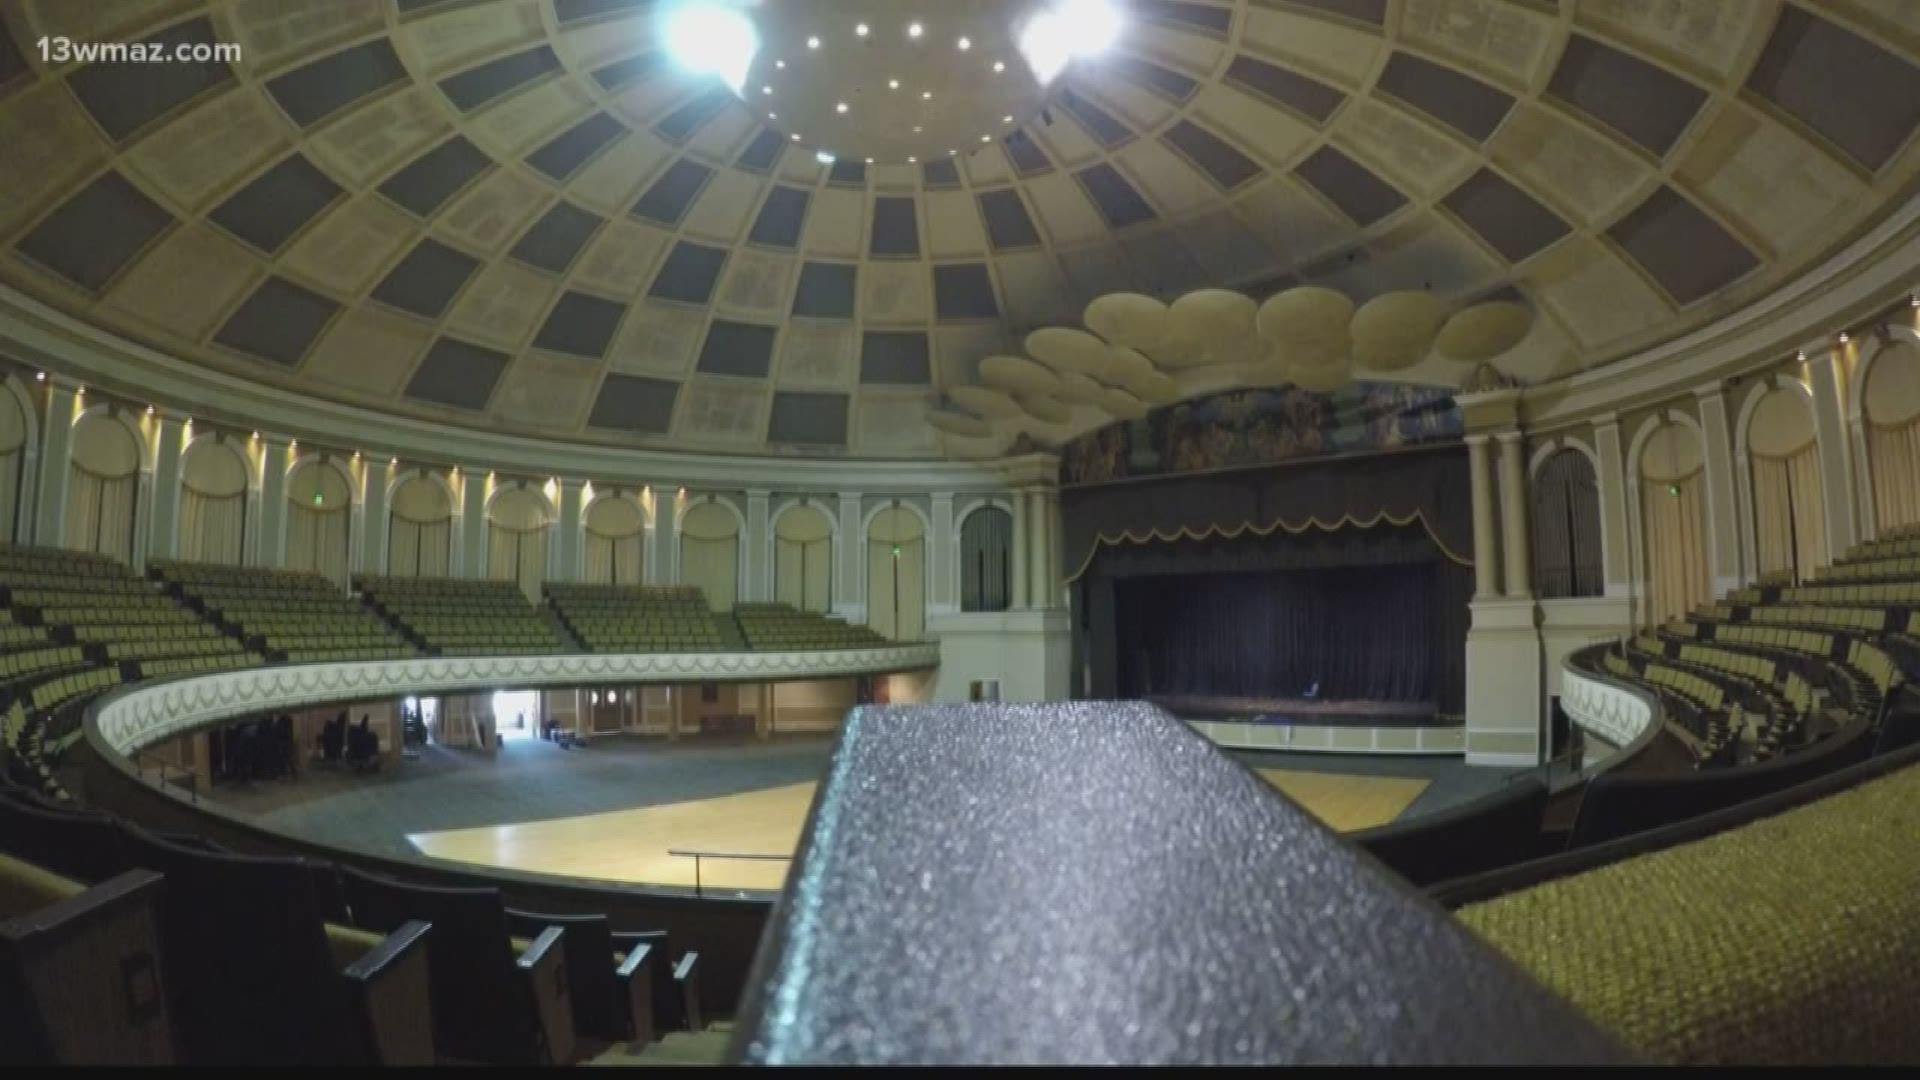 Macon's city auditorium is ready for upgrades after Bibb County commissioners approved nearly $1.5 million for architects and engineers to design and repair the roof.